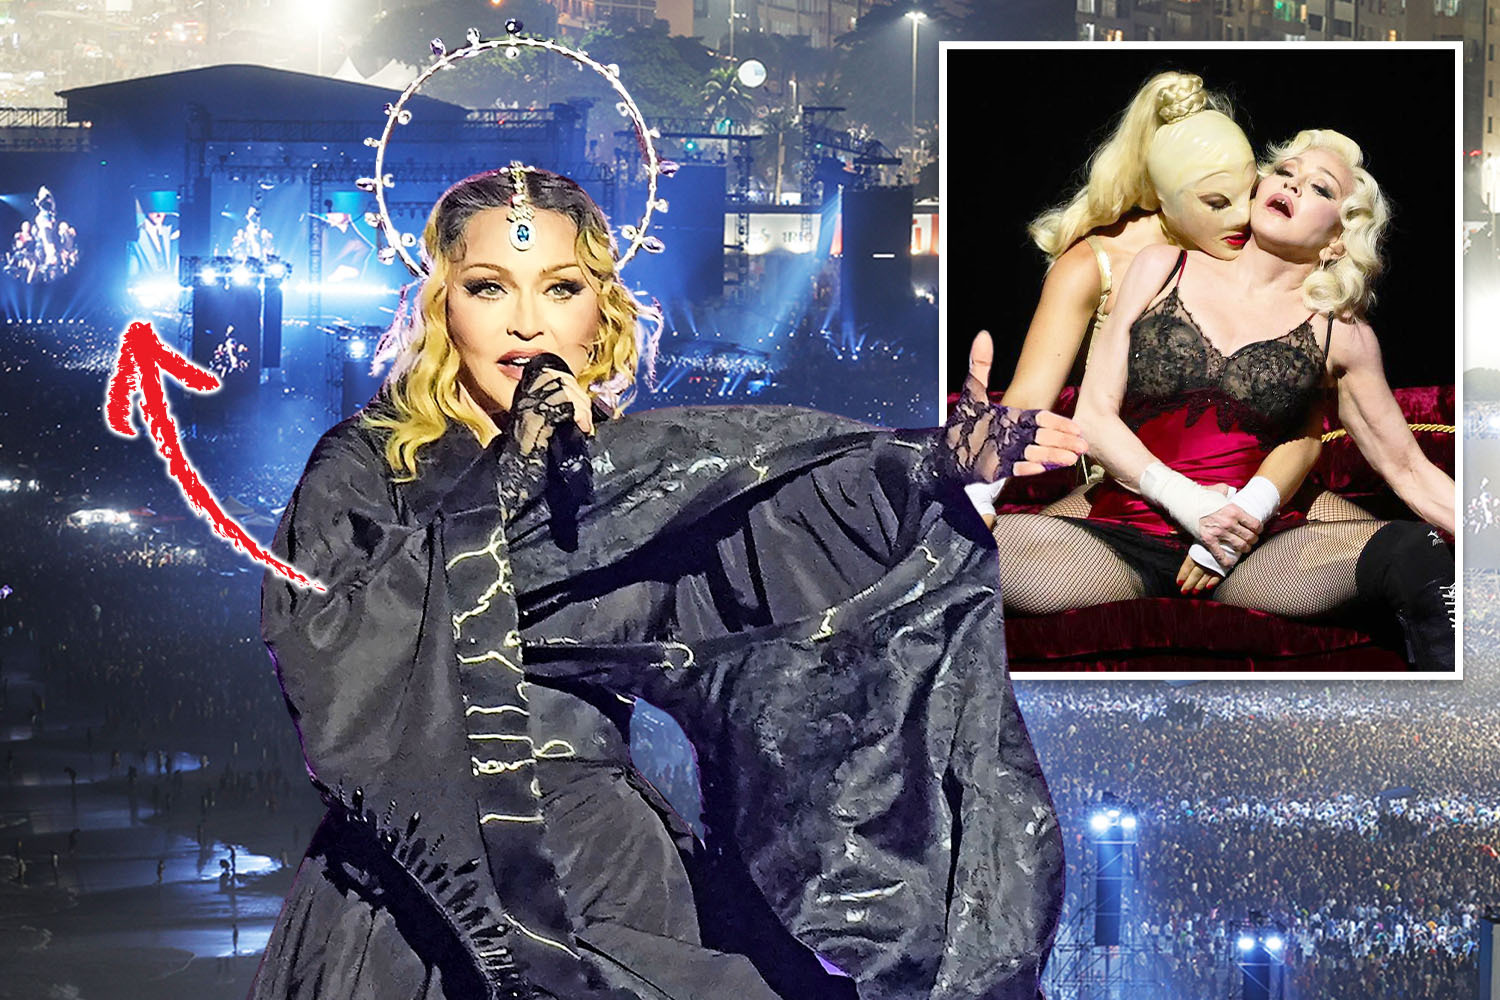 Madonna performs for 1.6MILLION fans in Brazil in last gig of Celebration Tour